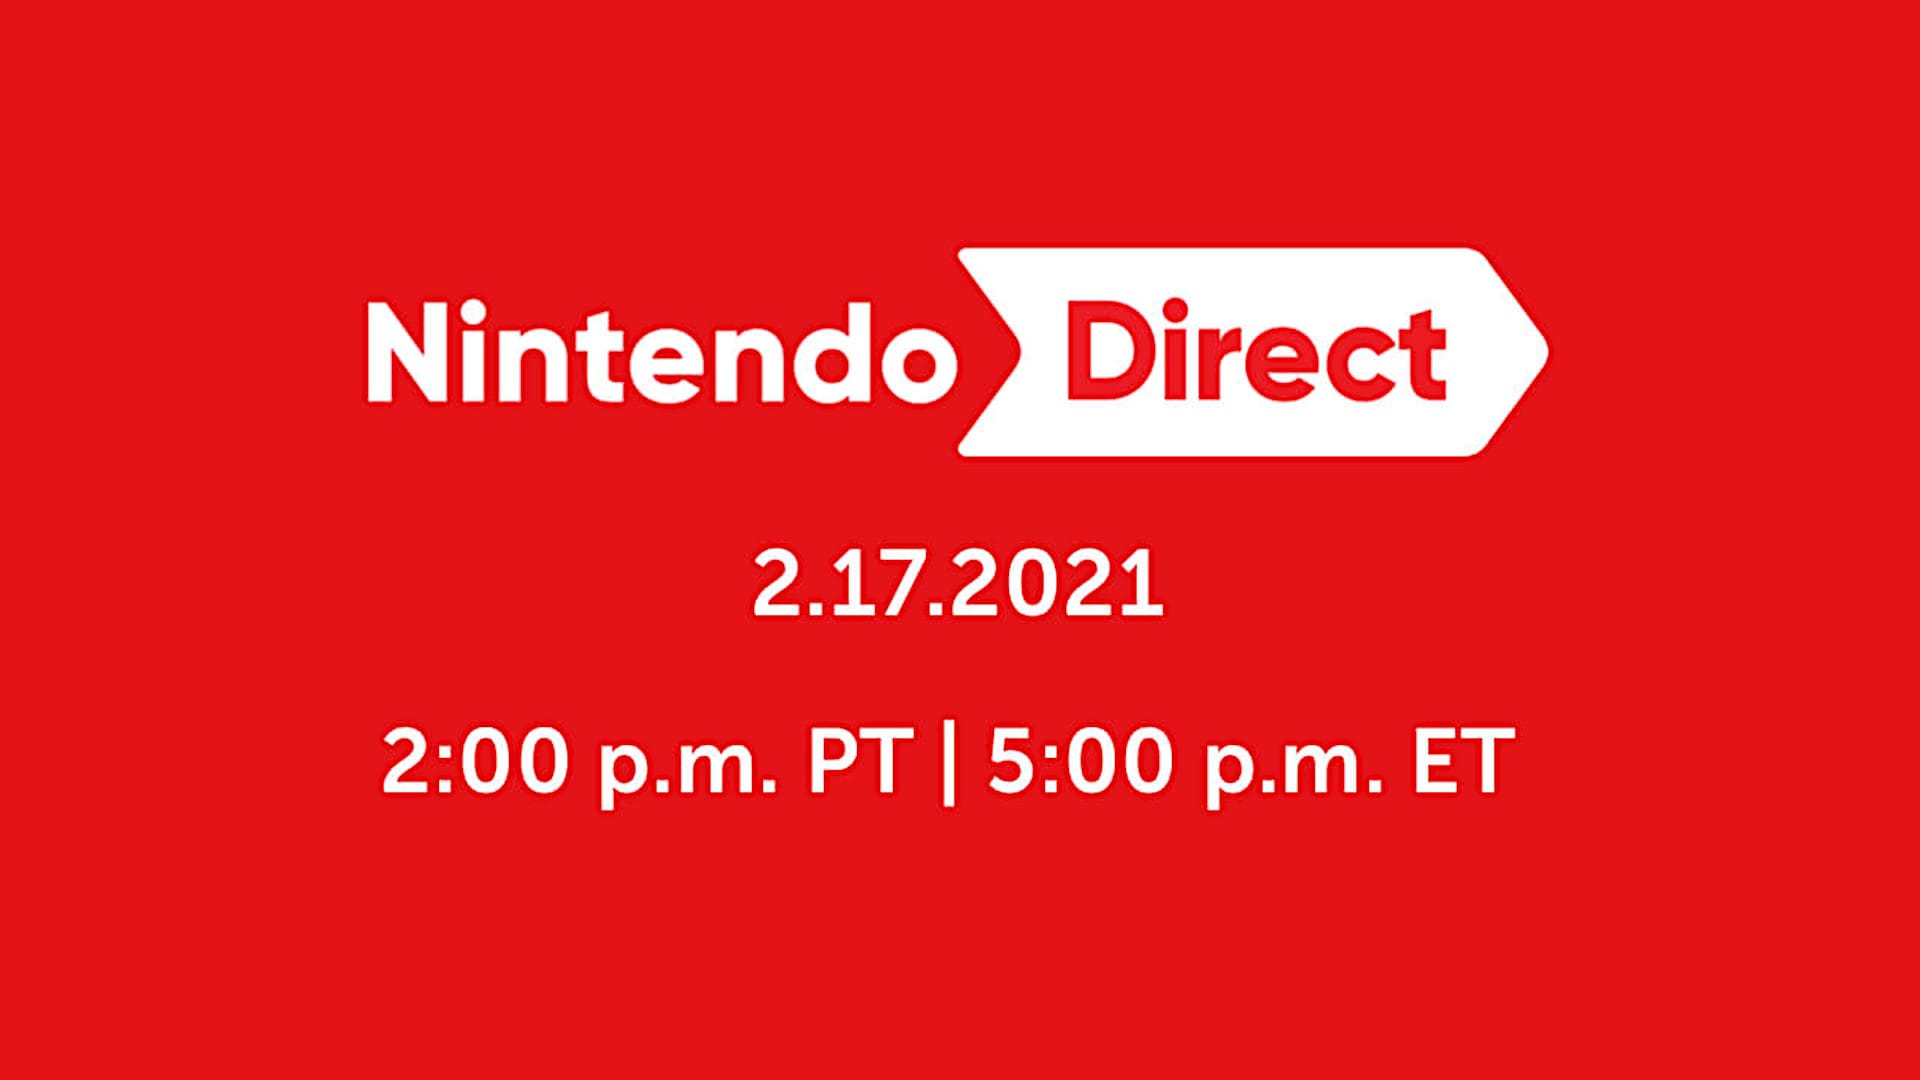 A banner announcing the new Nintendo Direct